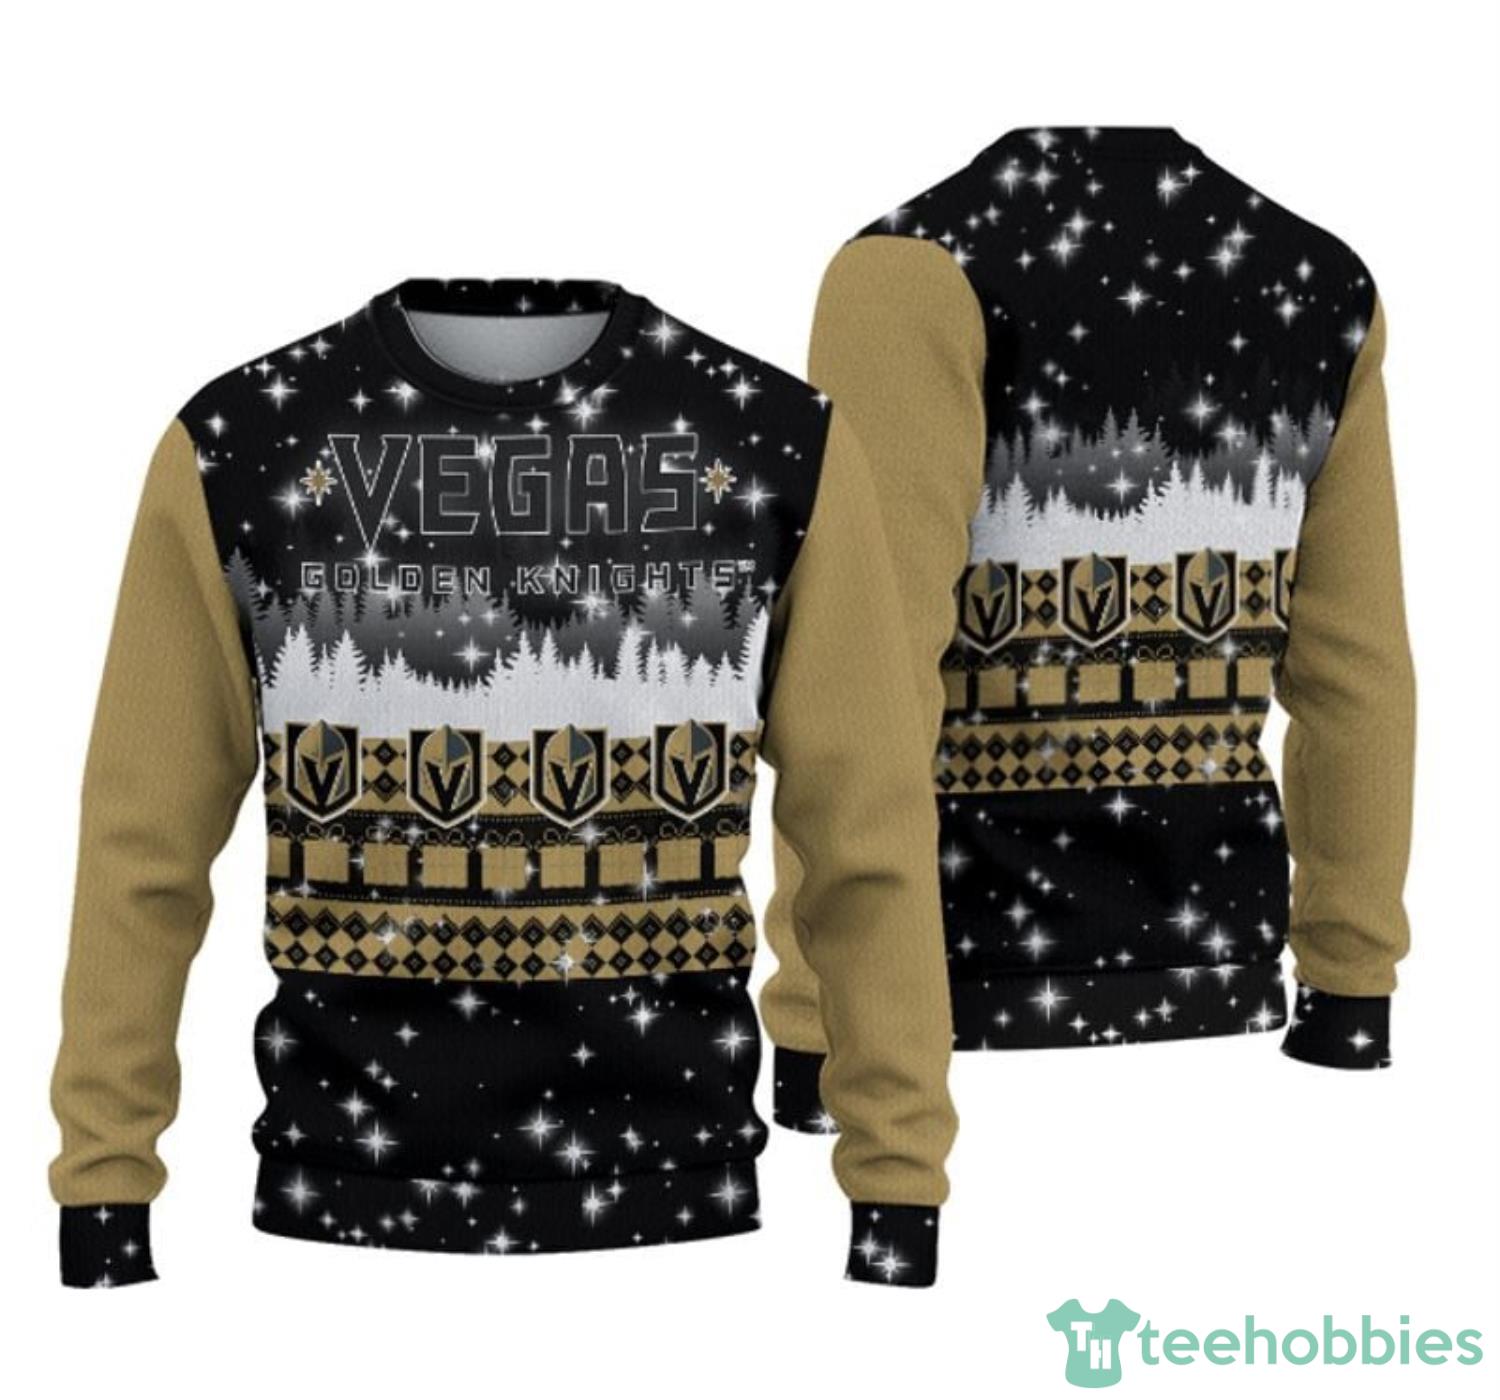 Custom Name NHL Vegas Golden Knights Ugly Christmas Sweater Perfect for  Every Fan - Banantees